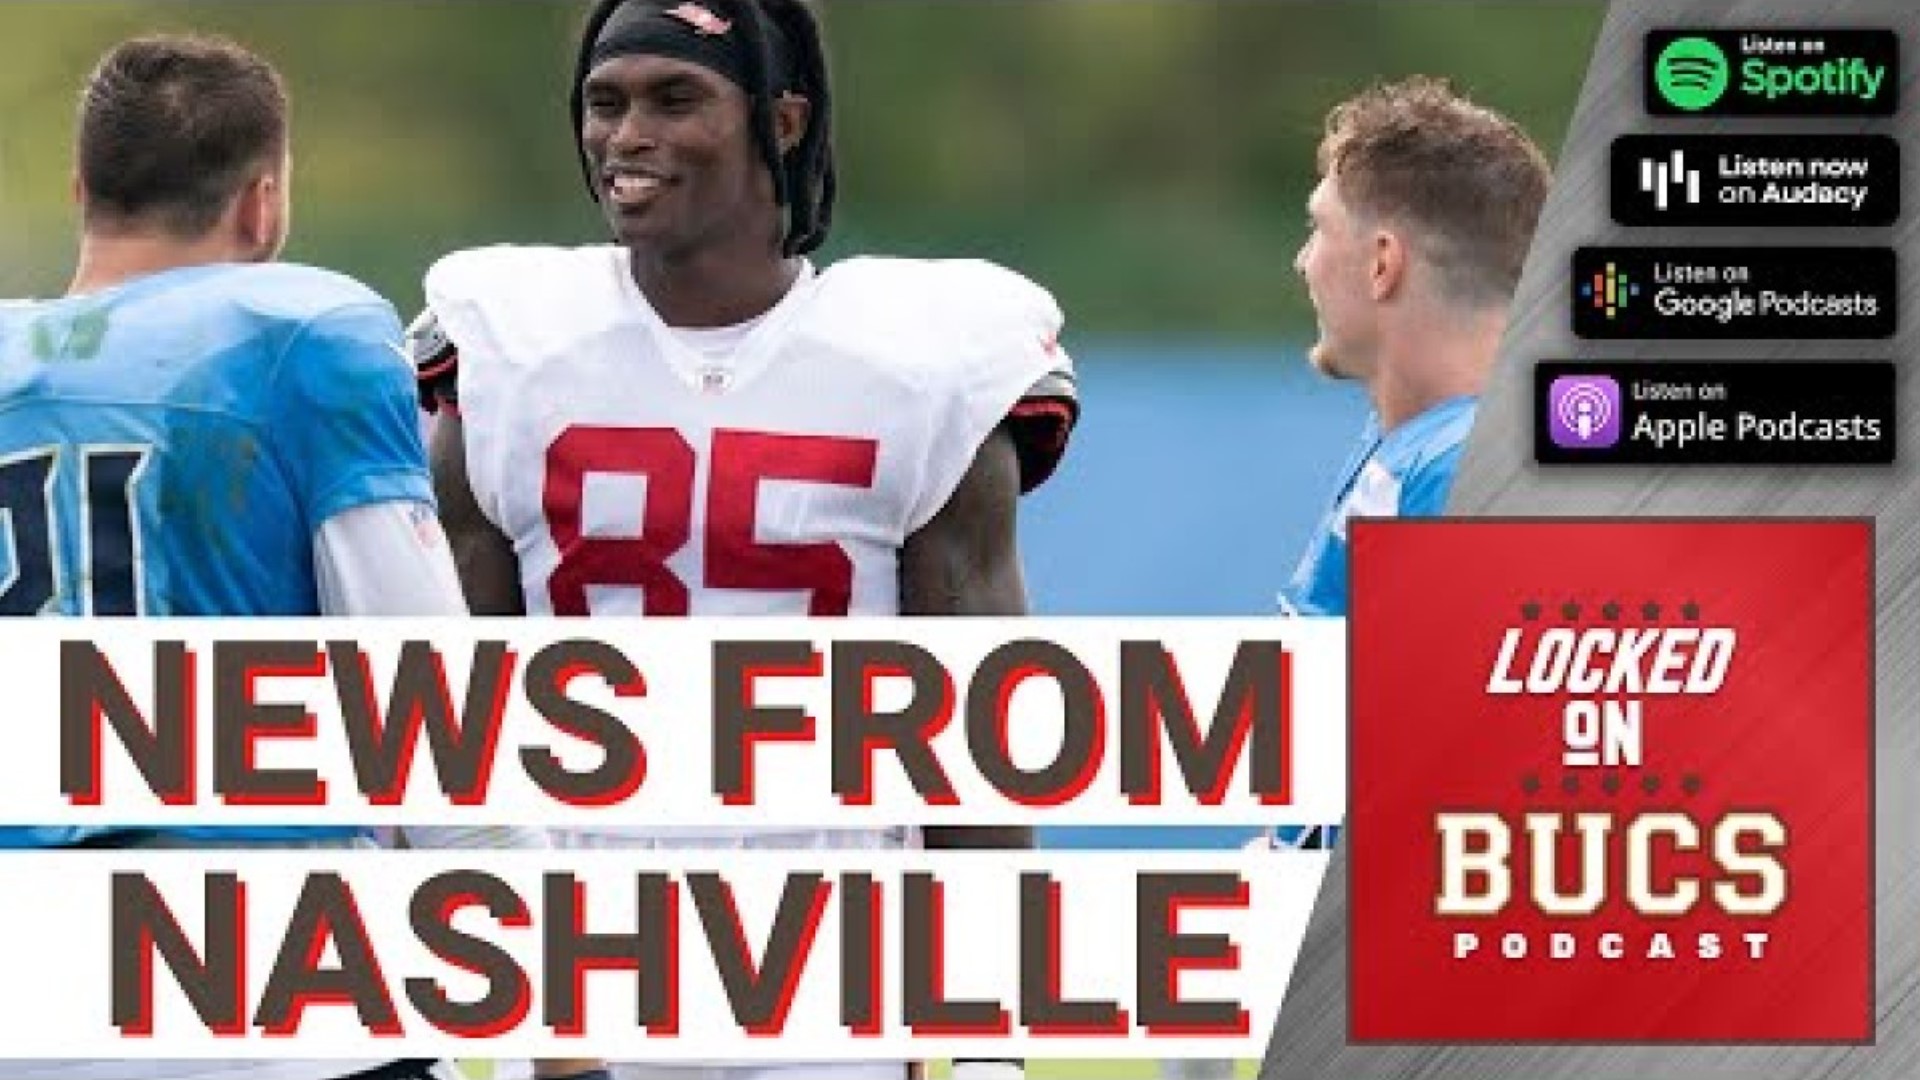 Tampa Bay Buccaneers and Tennessee Titans Training Camp Practice Update, Locked on Bucs